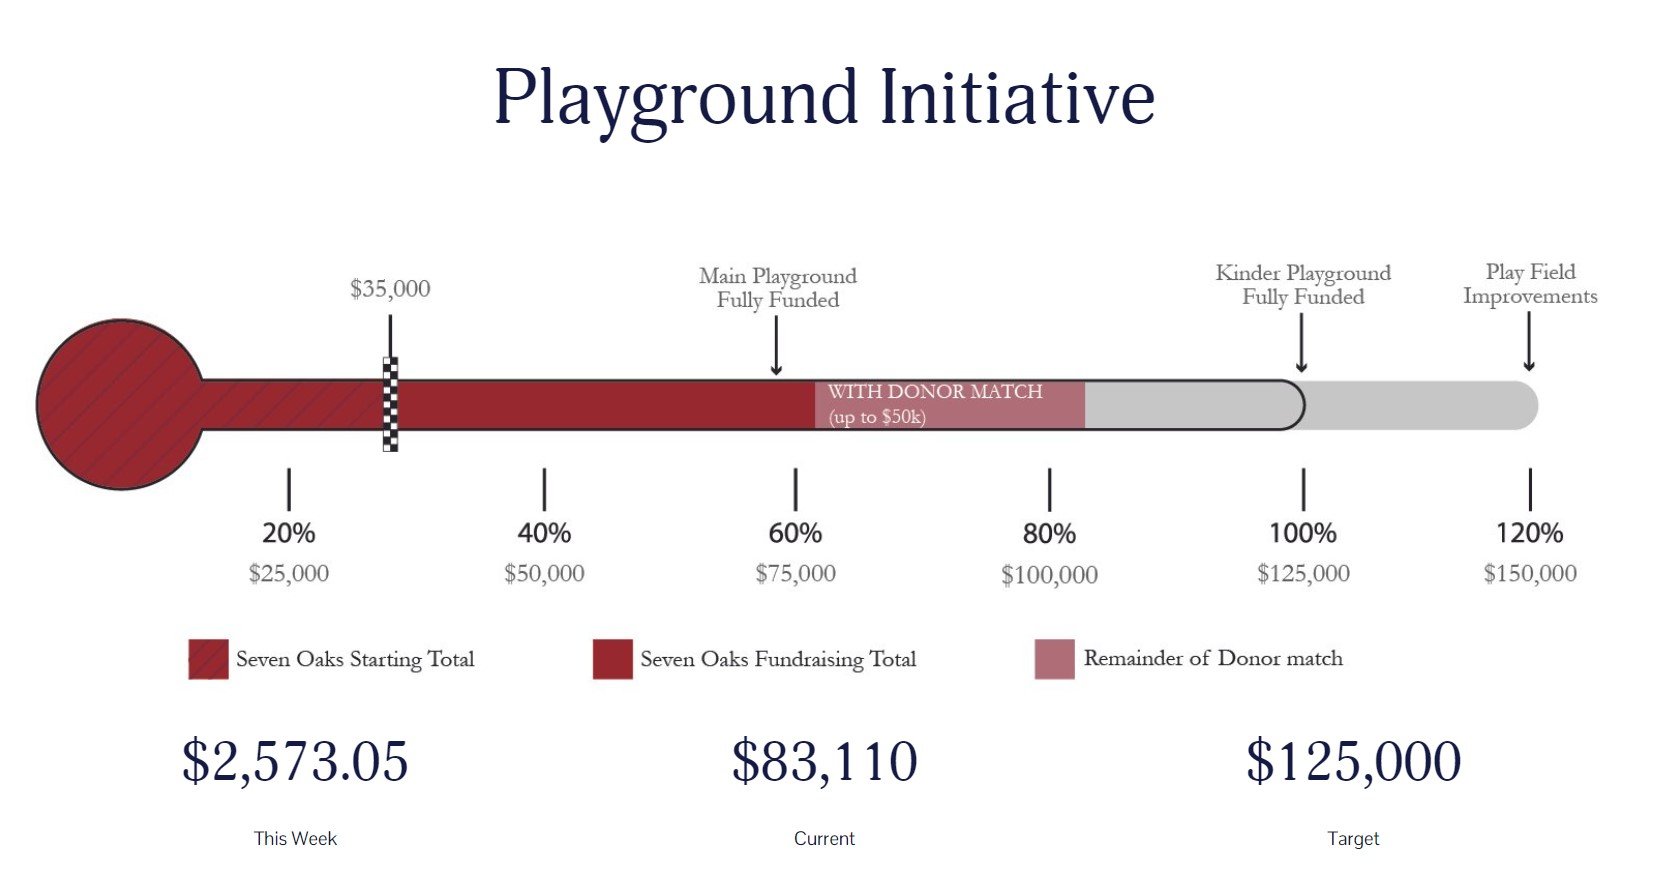 We are so thankful for our PTCA! This year they have raised $17,680.25 for our Playground Initiative and announced this week that we are committing to a full $20,000! We could not make these playgrounds happen without them. But we are not there yet!!